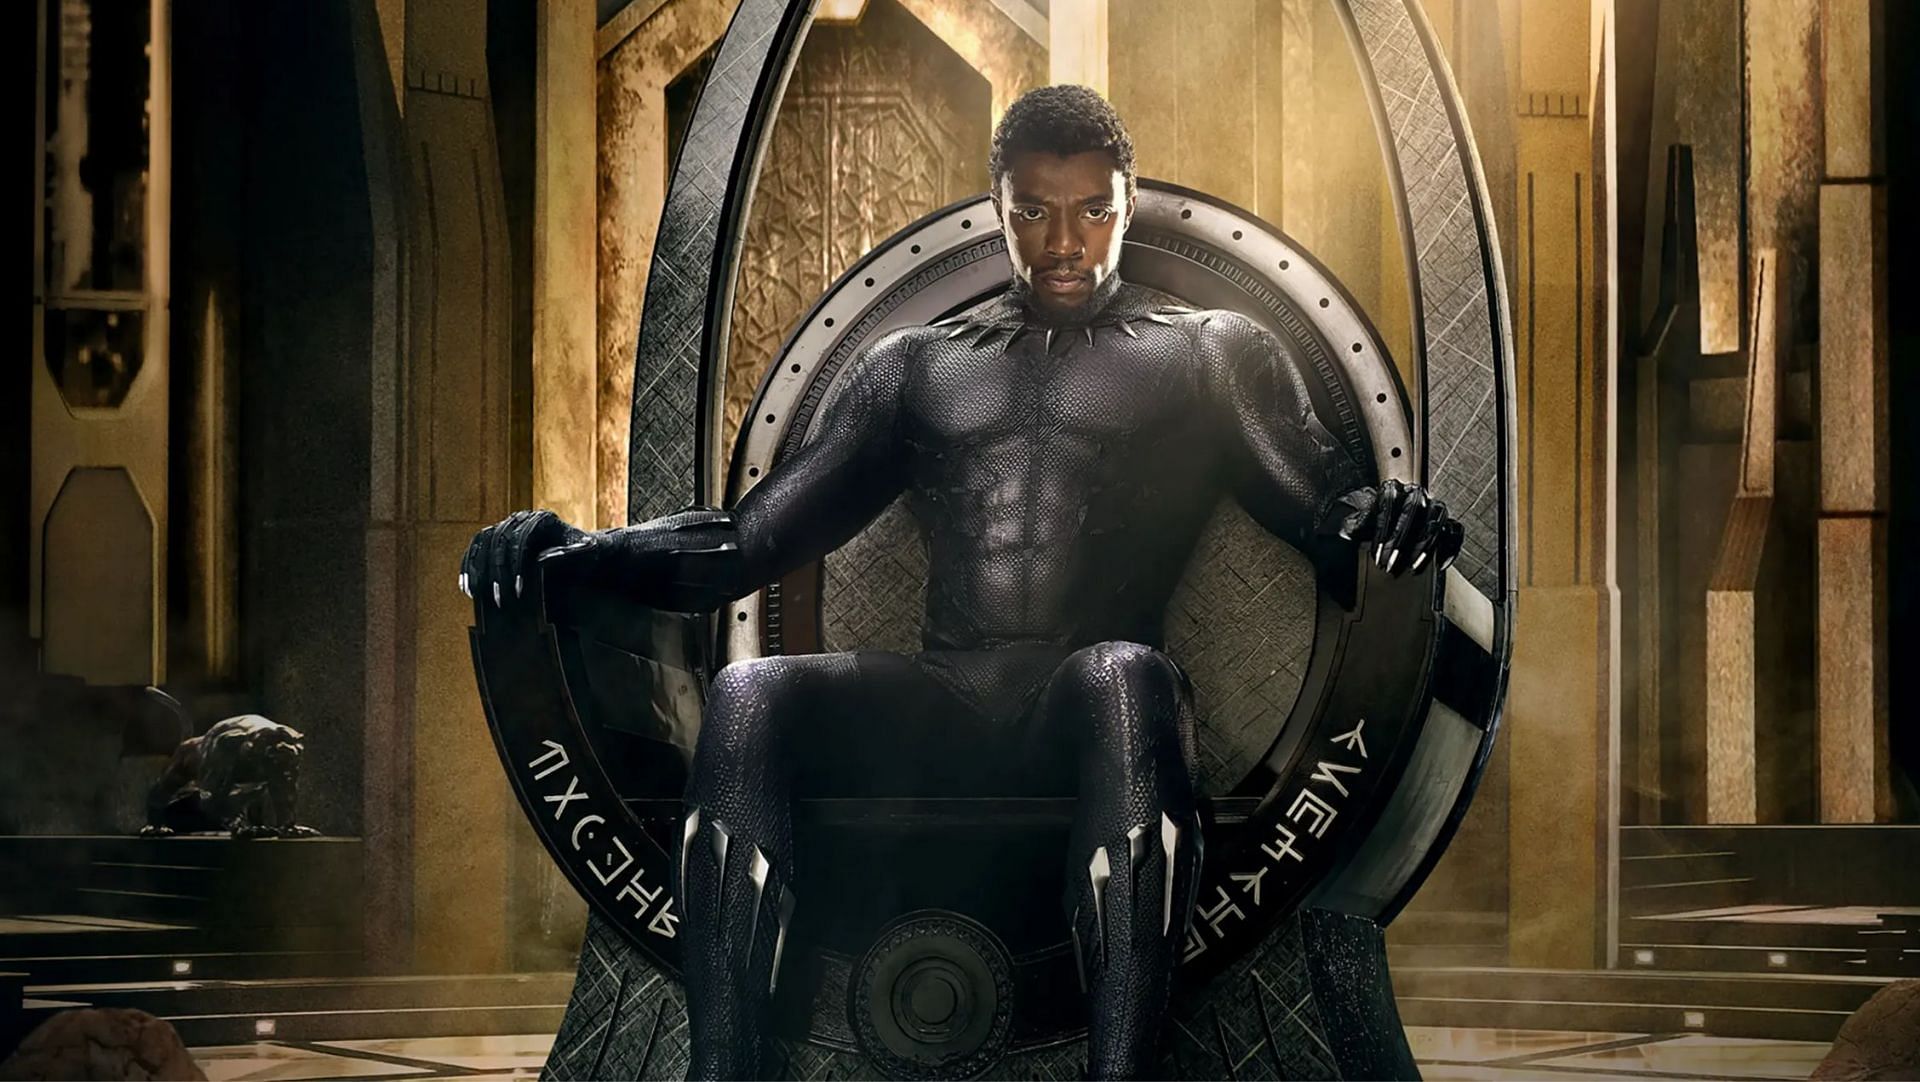 The Black Panther&#039;s impact on the genre was significant, inspiring readers and creators alike (Image via Marvel Studios)